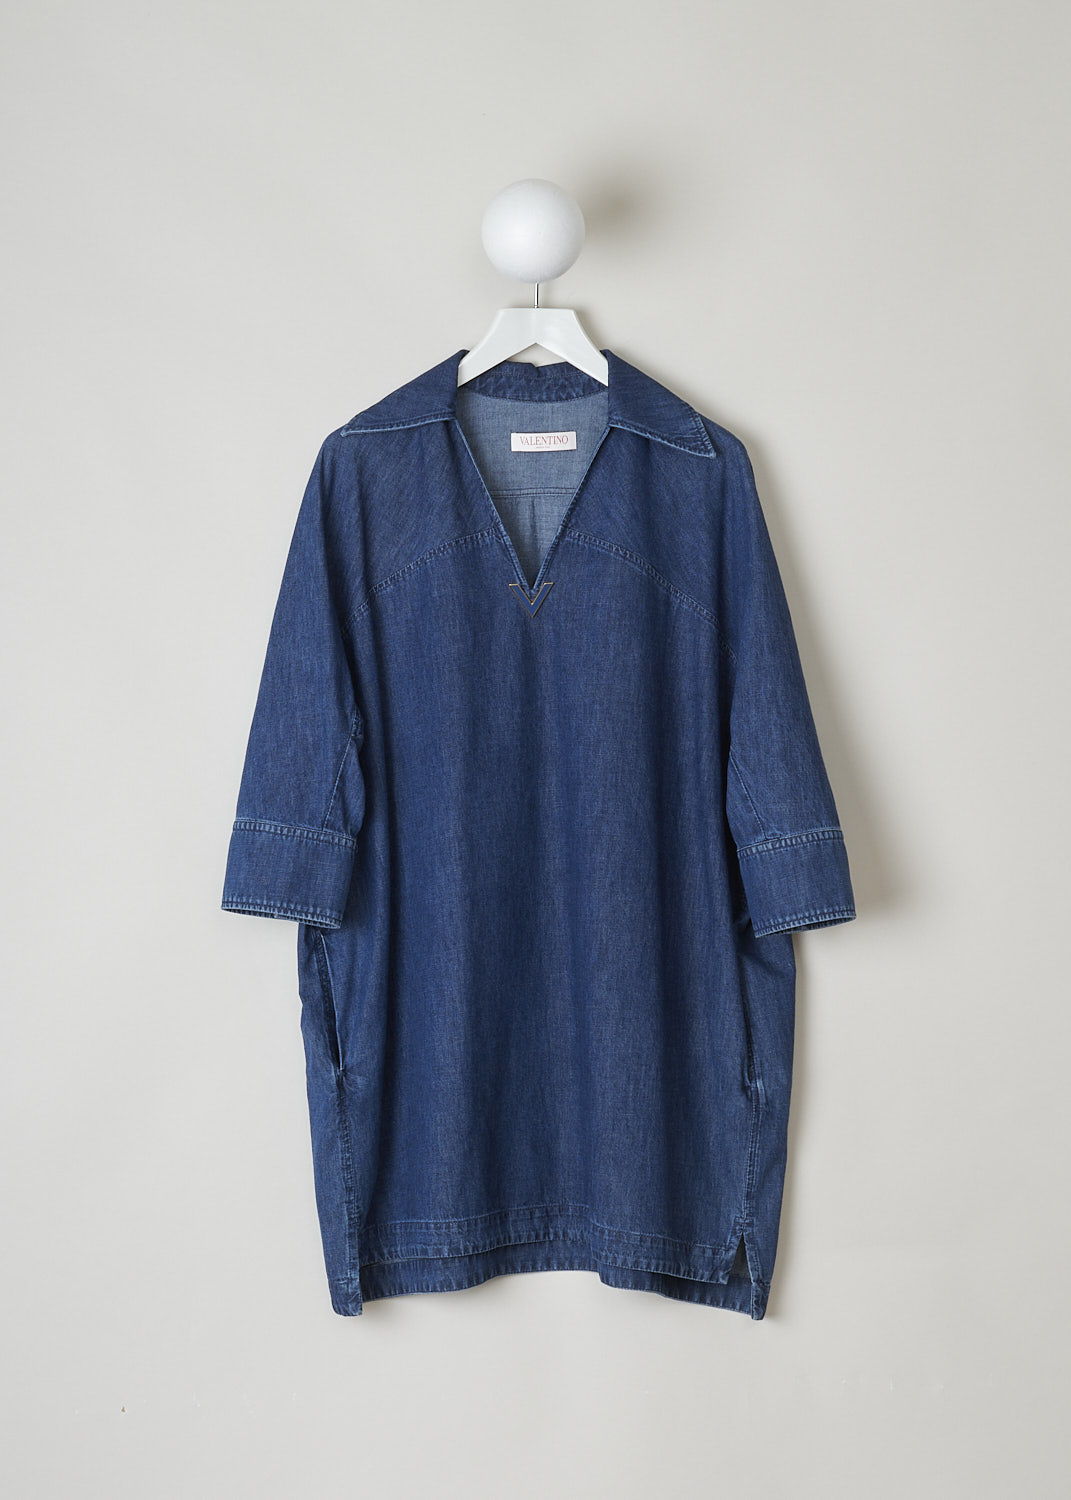 VALENTINO, DARK WASH DENIM TUNIC, XB3DB01I433_558XB3DB01I433_558, Blue, Front, This wide tunic in a darker wash jean fabric has a spread collar with a V-neckline. The end of the V-neck is decorated with the brands signature V. The tunic has three-quarter raglan sleeves with buttoned cuffs. Slanted pockets can be found concealed in the side seams. The tunic has an asymmetrical finish, meaning the back is a little longer than the front. Small slits can be found on either side. 
